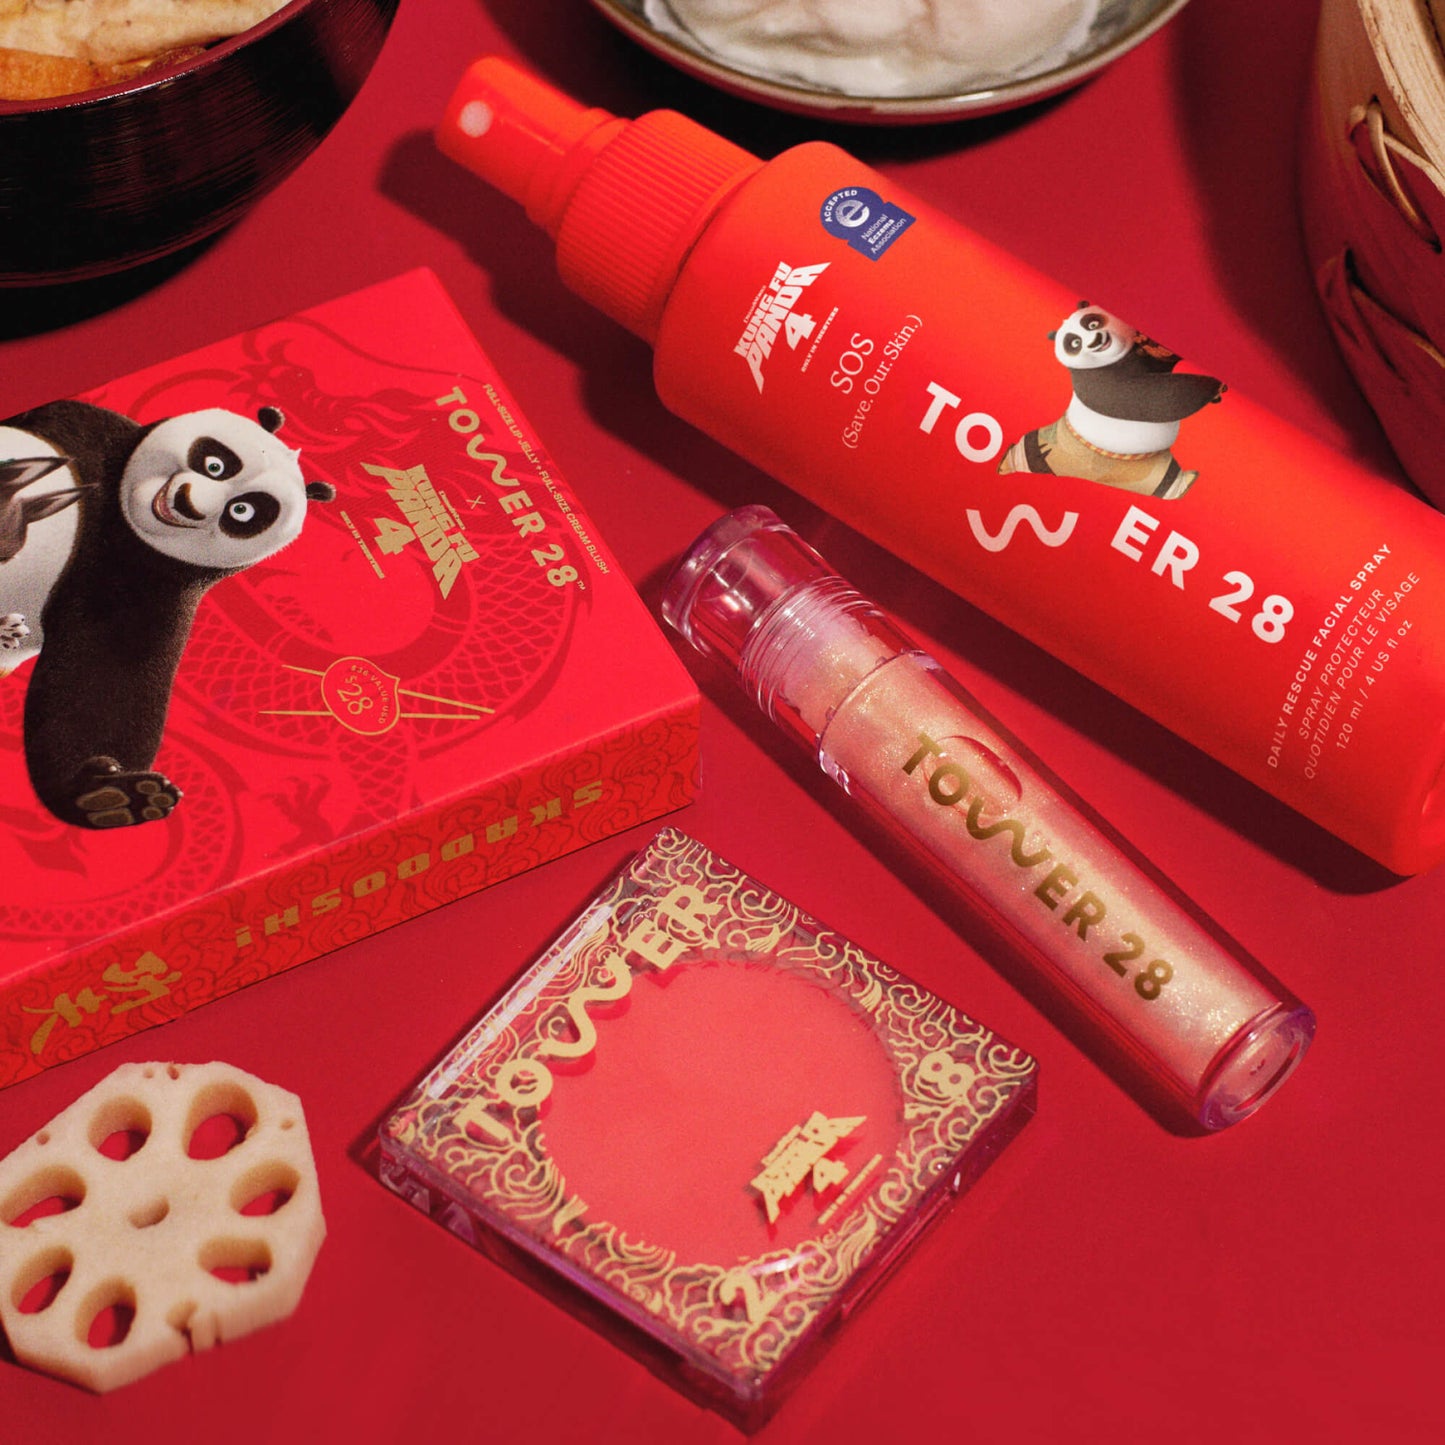 Tower 28 x Kung Fu Panda 4 Collection [Shared: Table flat lay of Tower 28 Beauty x Kung Fu Panda 4 limited edition collaboration collection: Lip + Cheek Duo and SOS Daily Rescue Facial Spray. The Lip + Cheek Duo features one full size ShineOn Lip Jelly in Magic and one full size BeachPlease Cream Blush in Dumpling Hour.]